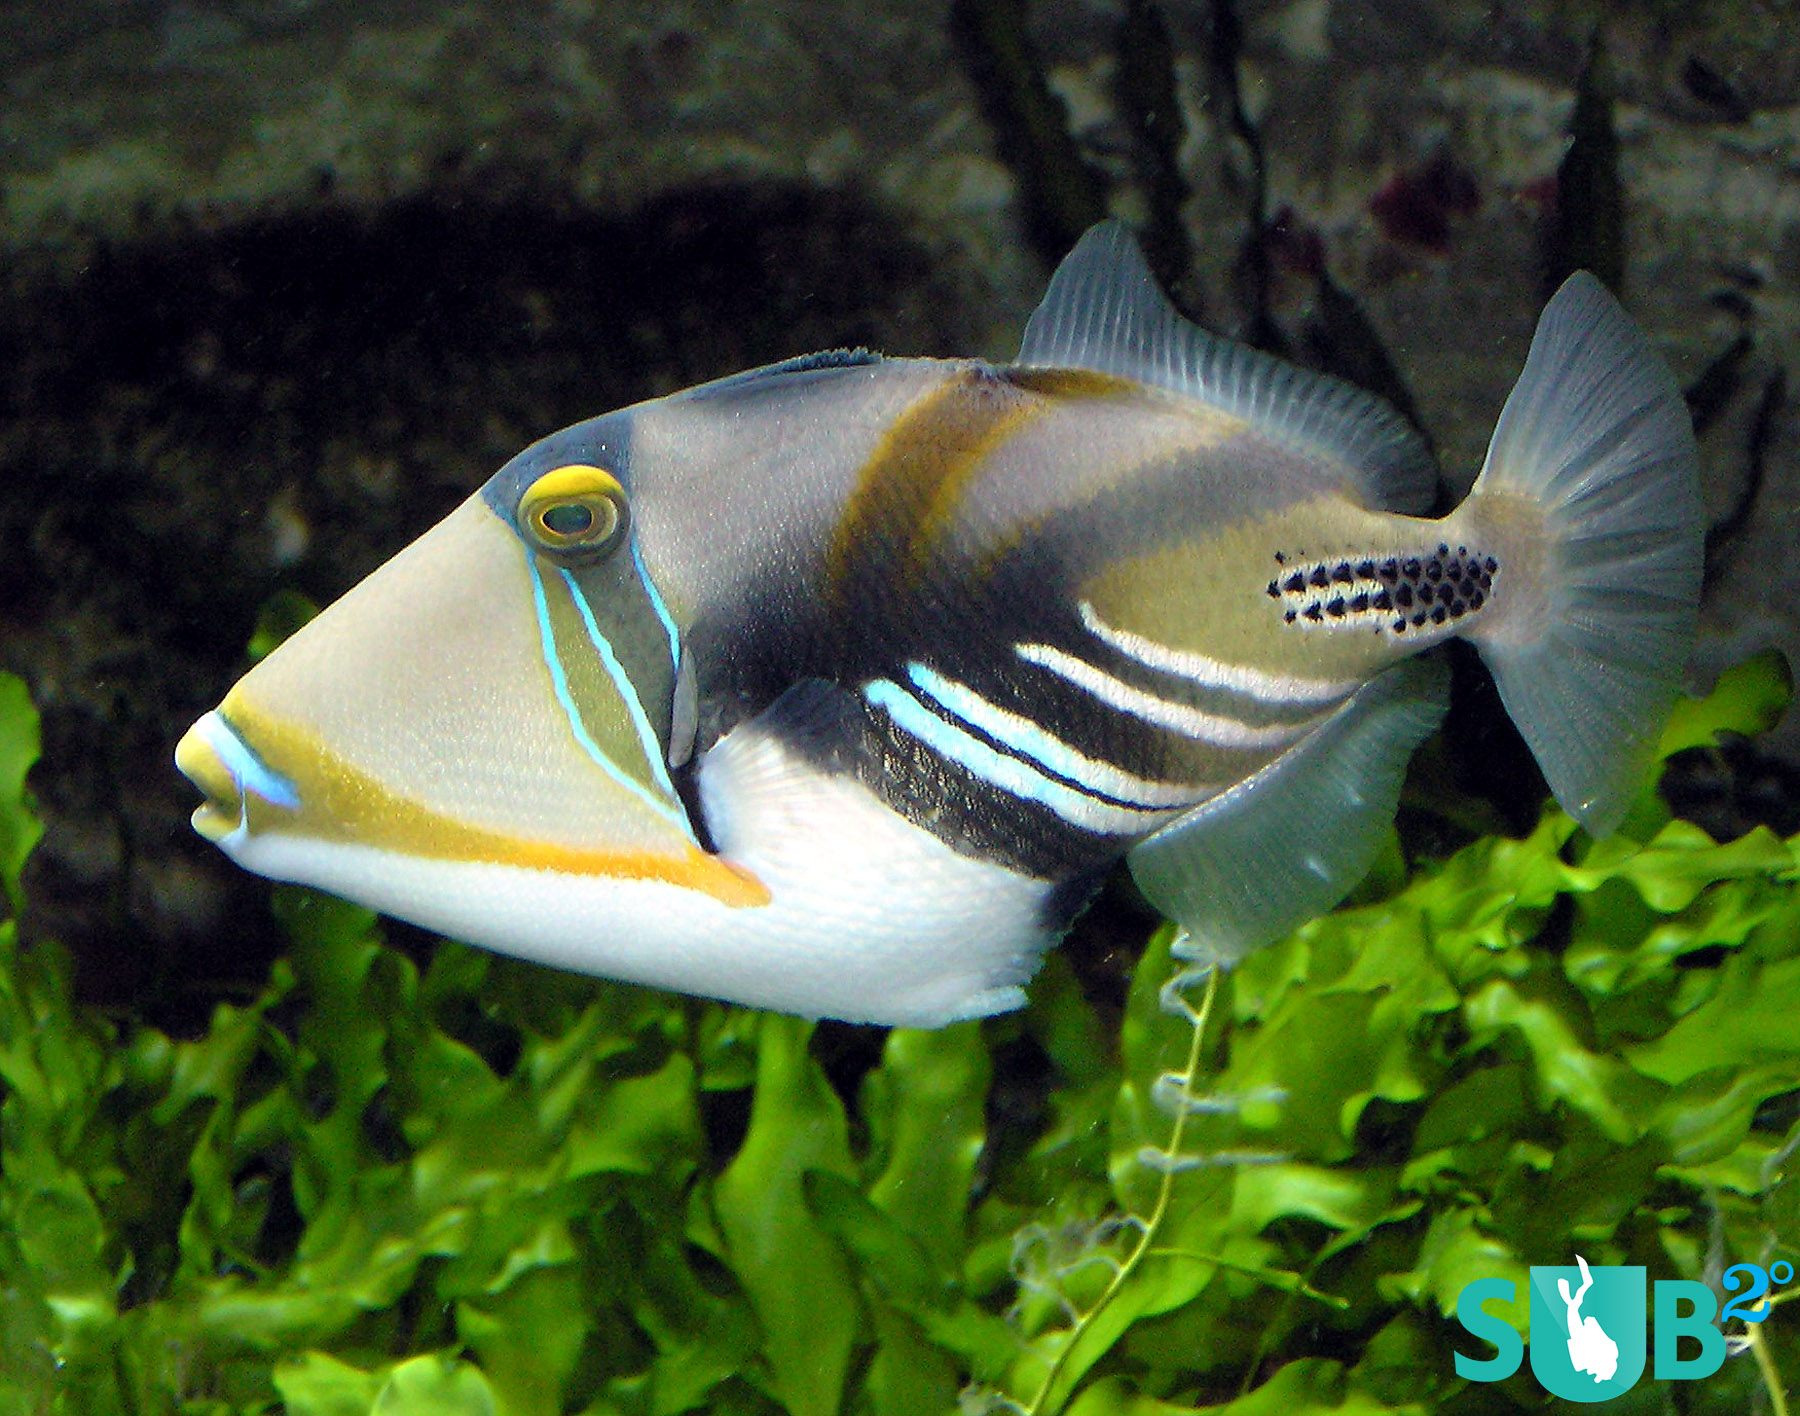 Just hearing the name Picasso Triggerfish is enough to tell you that this fish is a work of art.